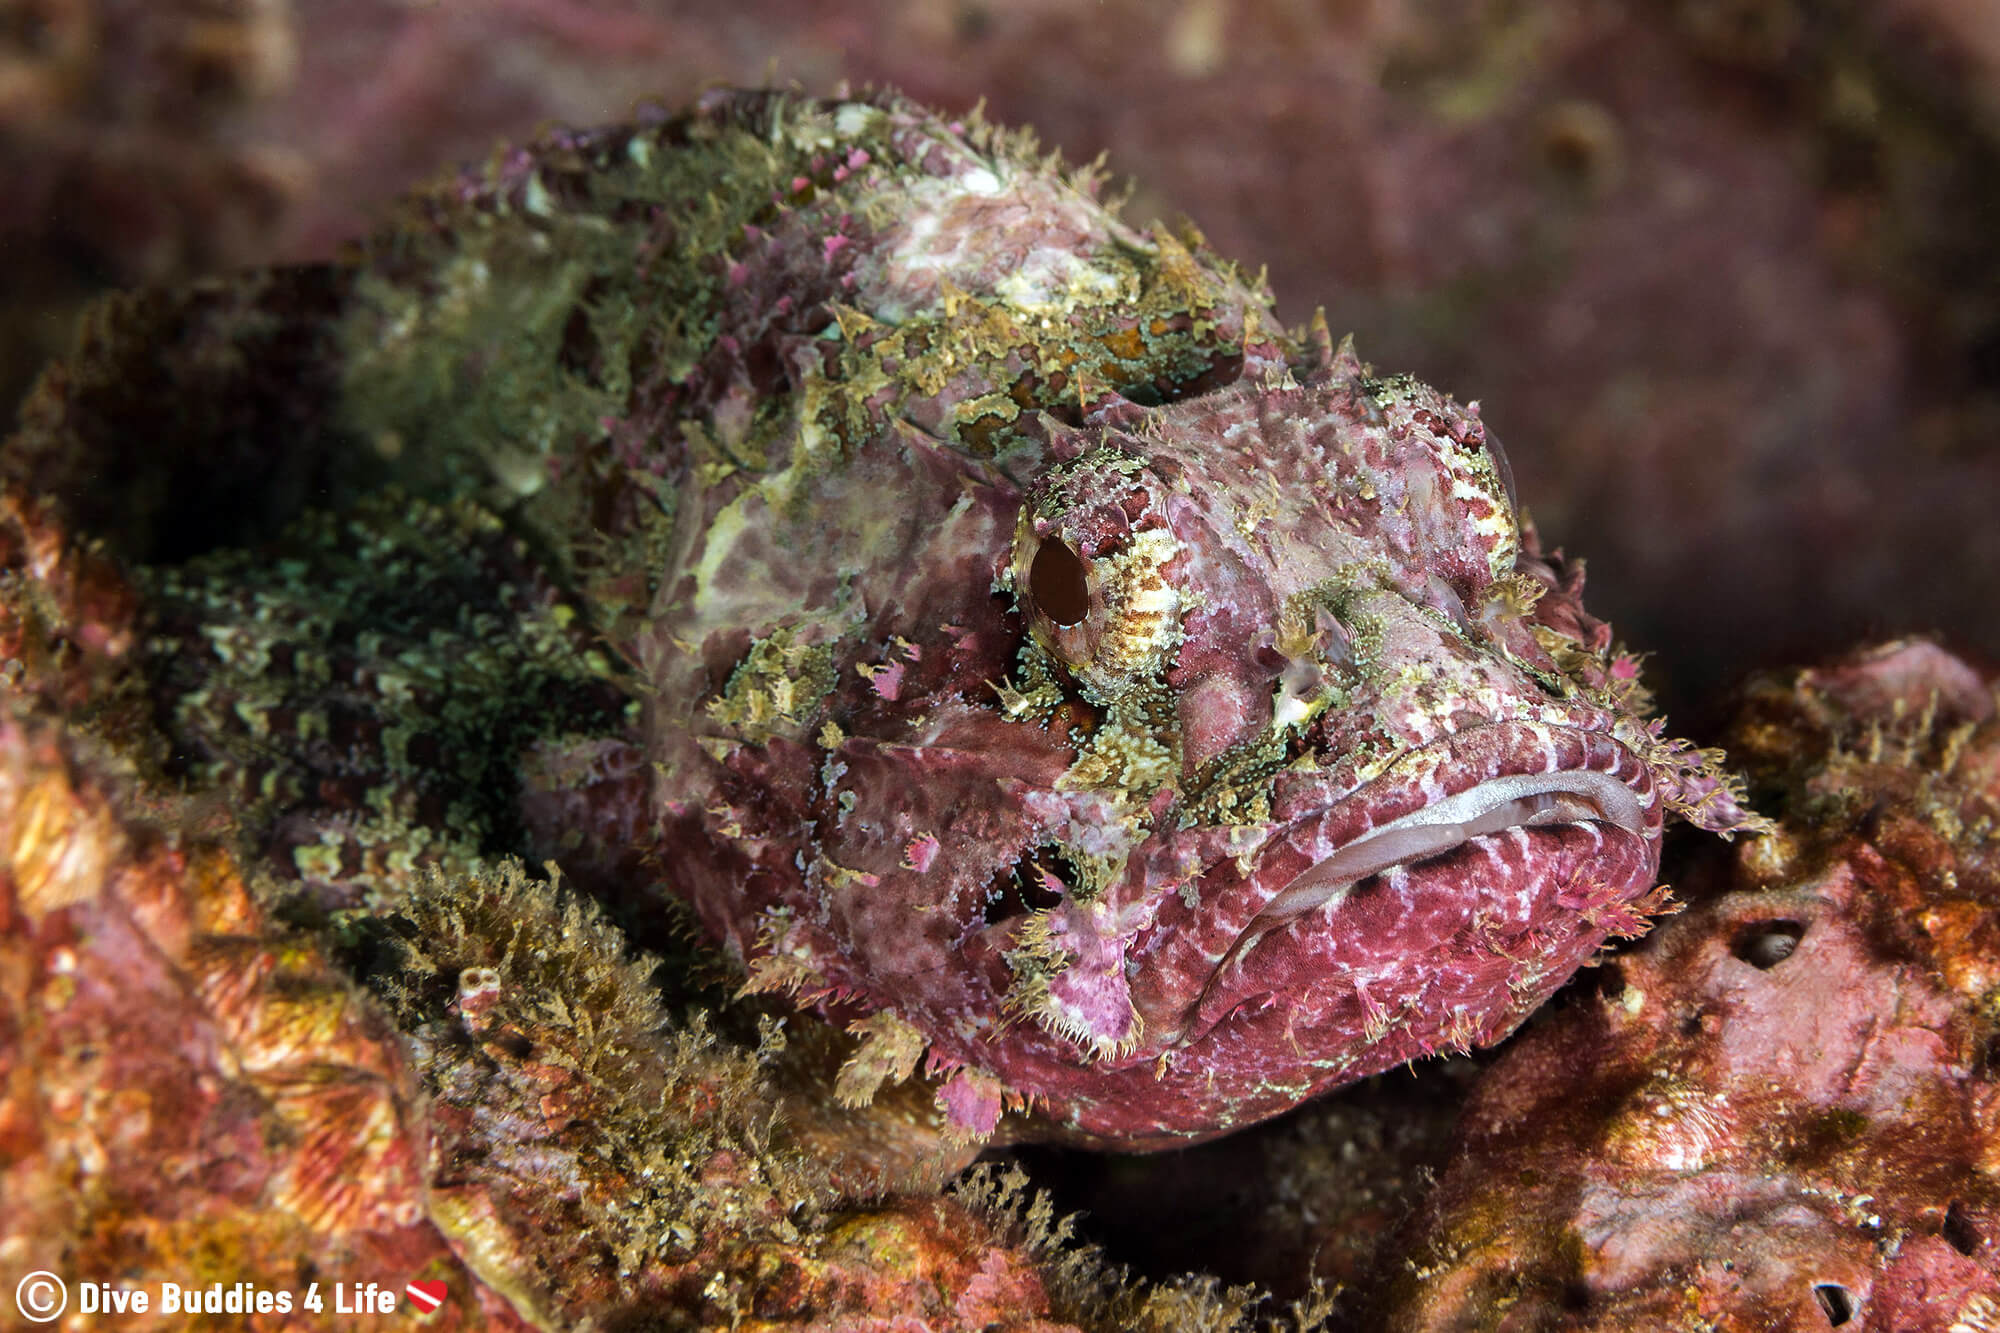 Sneaky Scorpion Fish On A Rock In The Pacific Ocean, Scuba Diving Zihuatanejo, Mexico